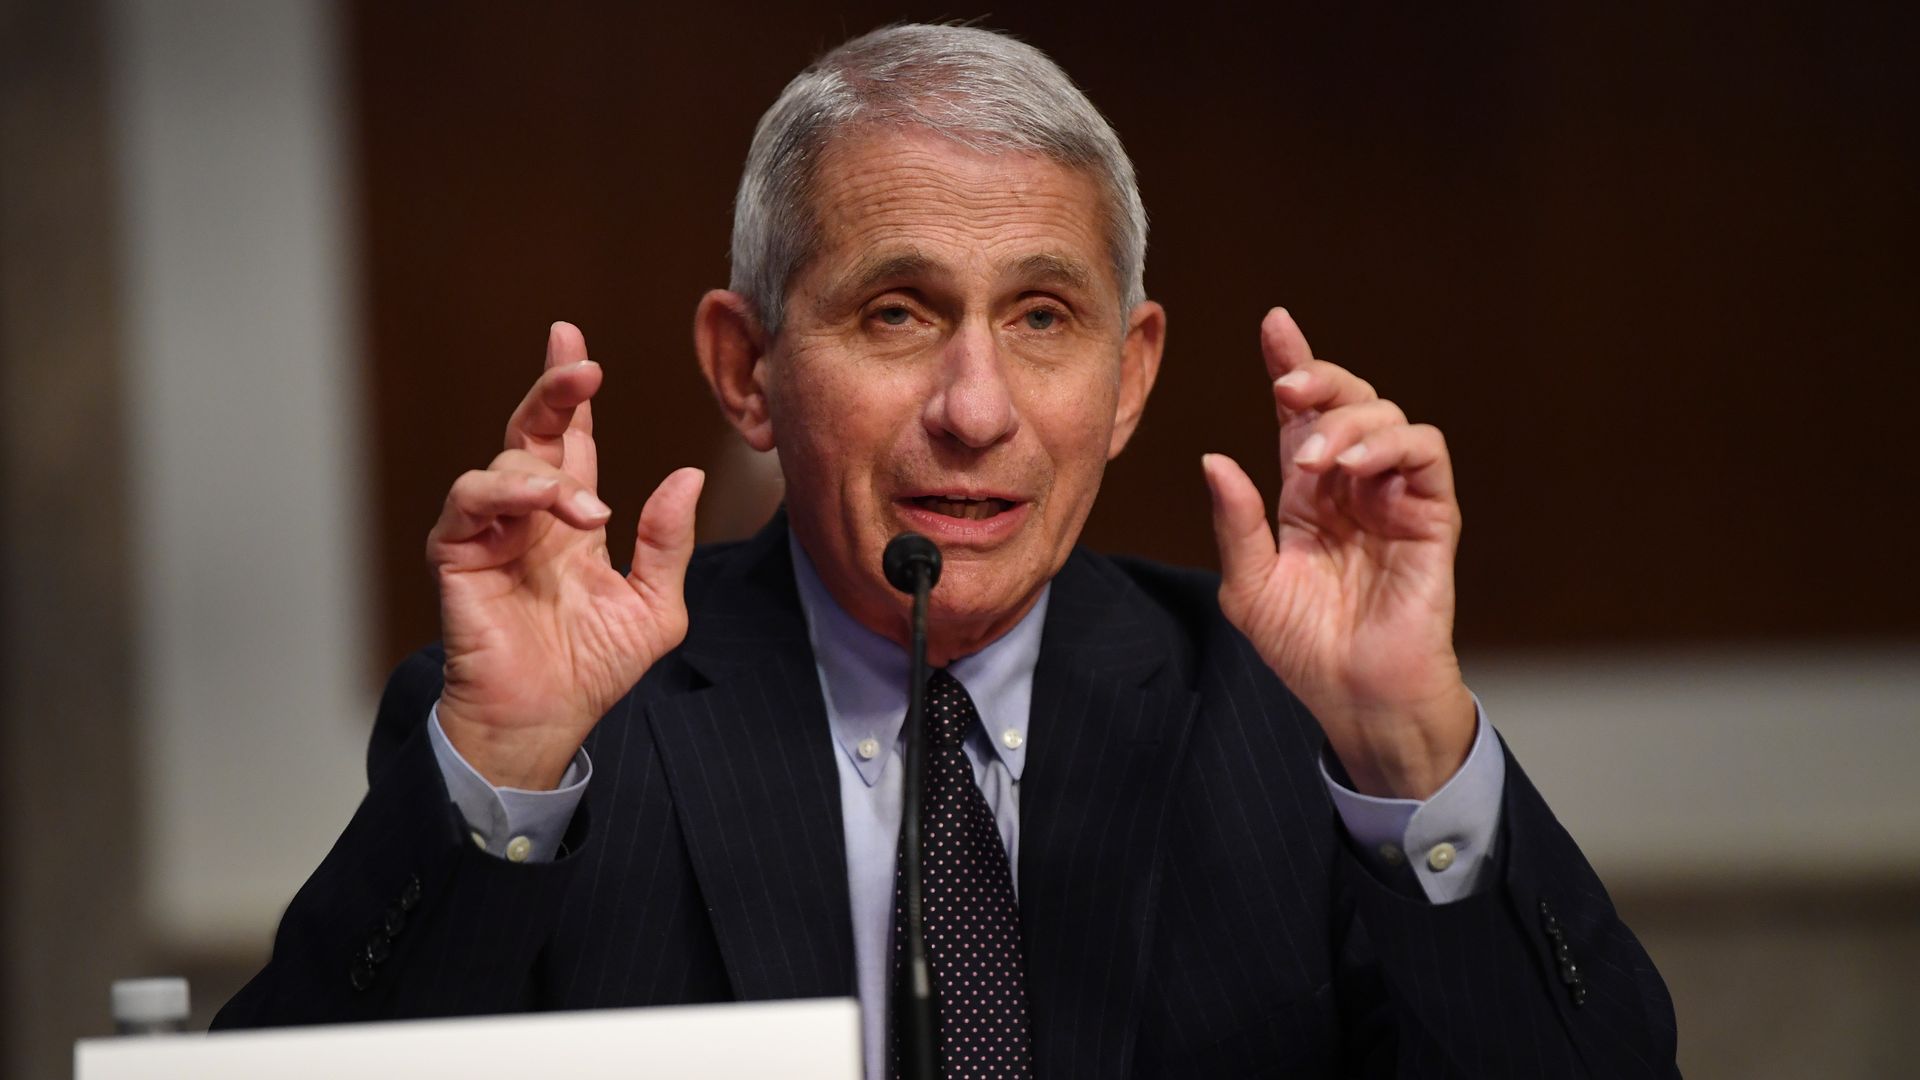 Dr. Anthony Fauci, director of the National Institute for Allergy and Infectious Diseases, testifies at a hearing in the Senate 